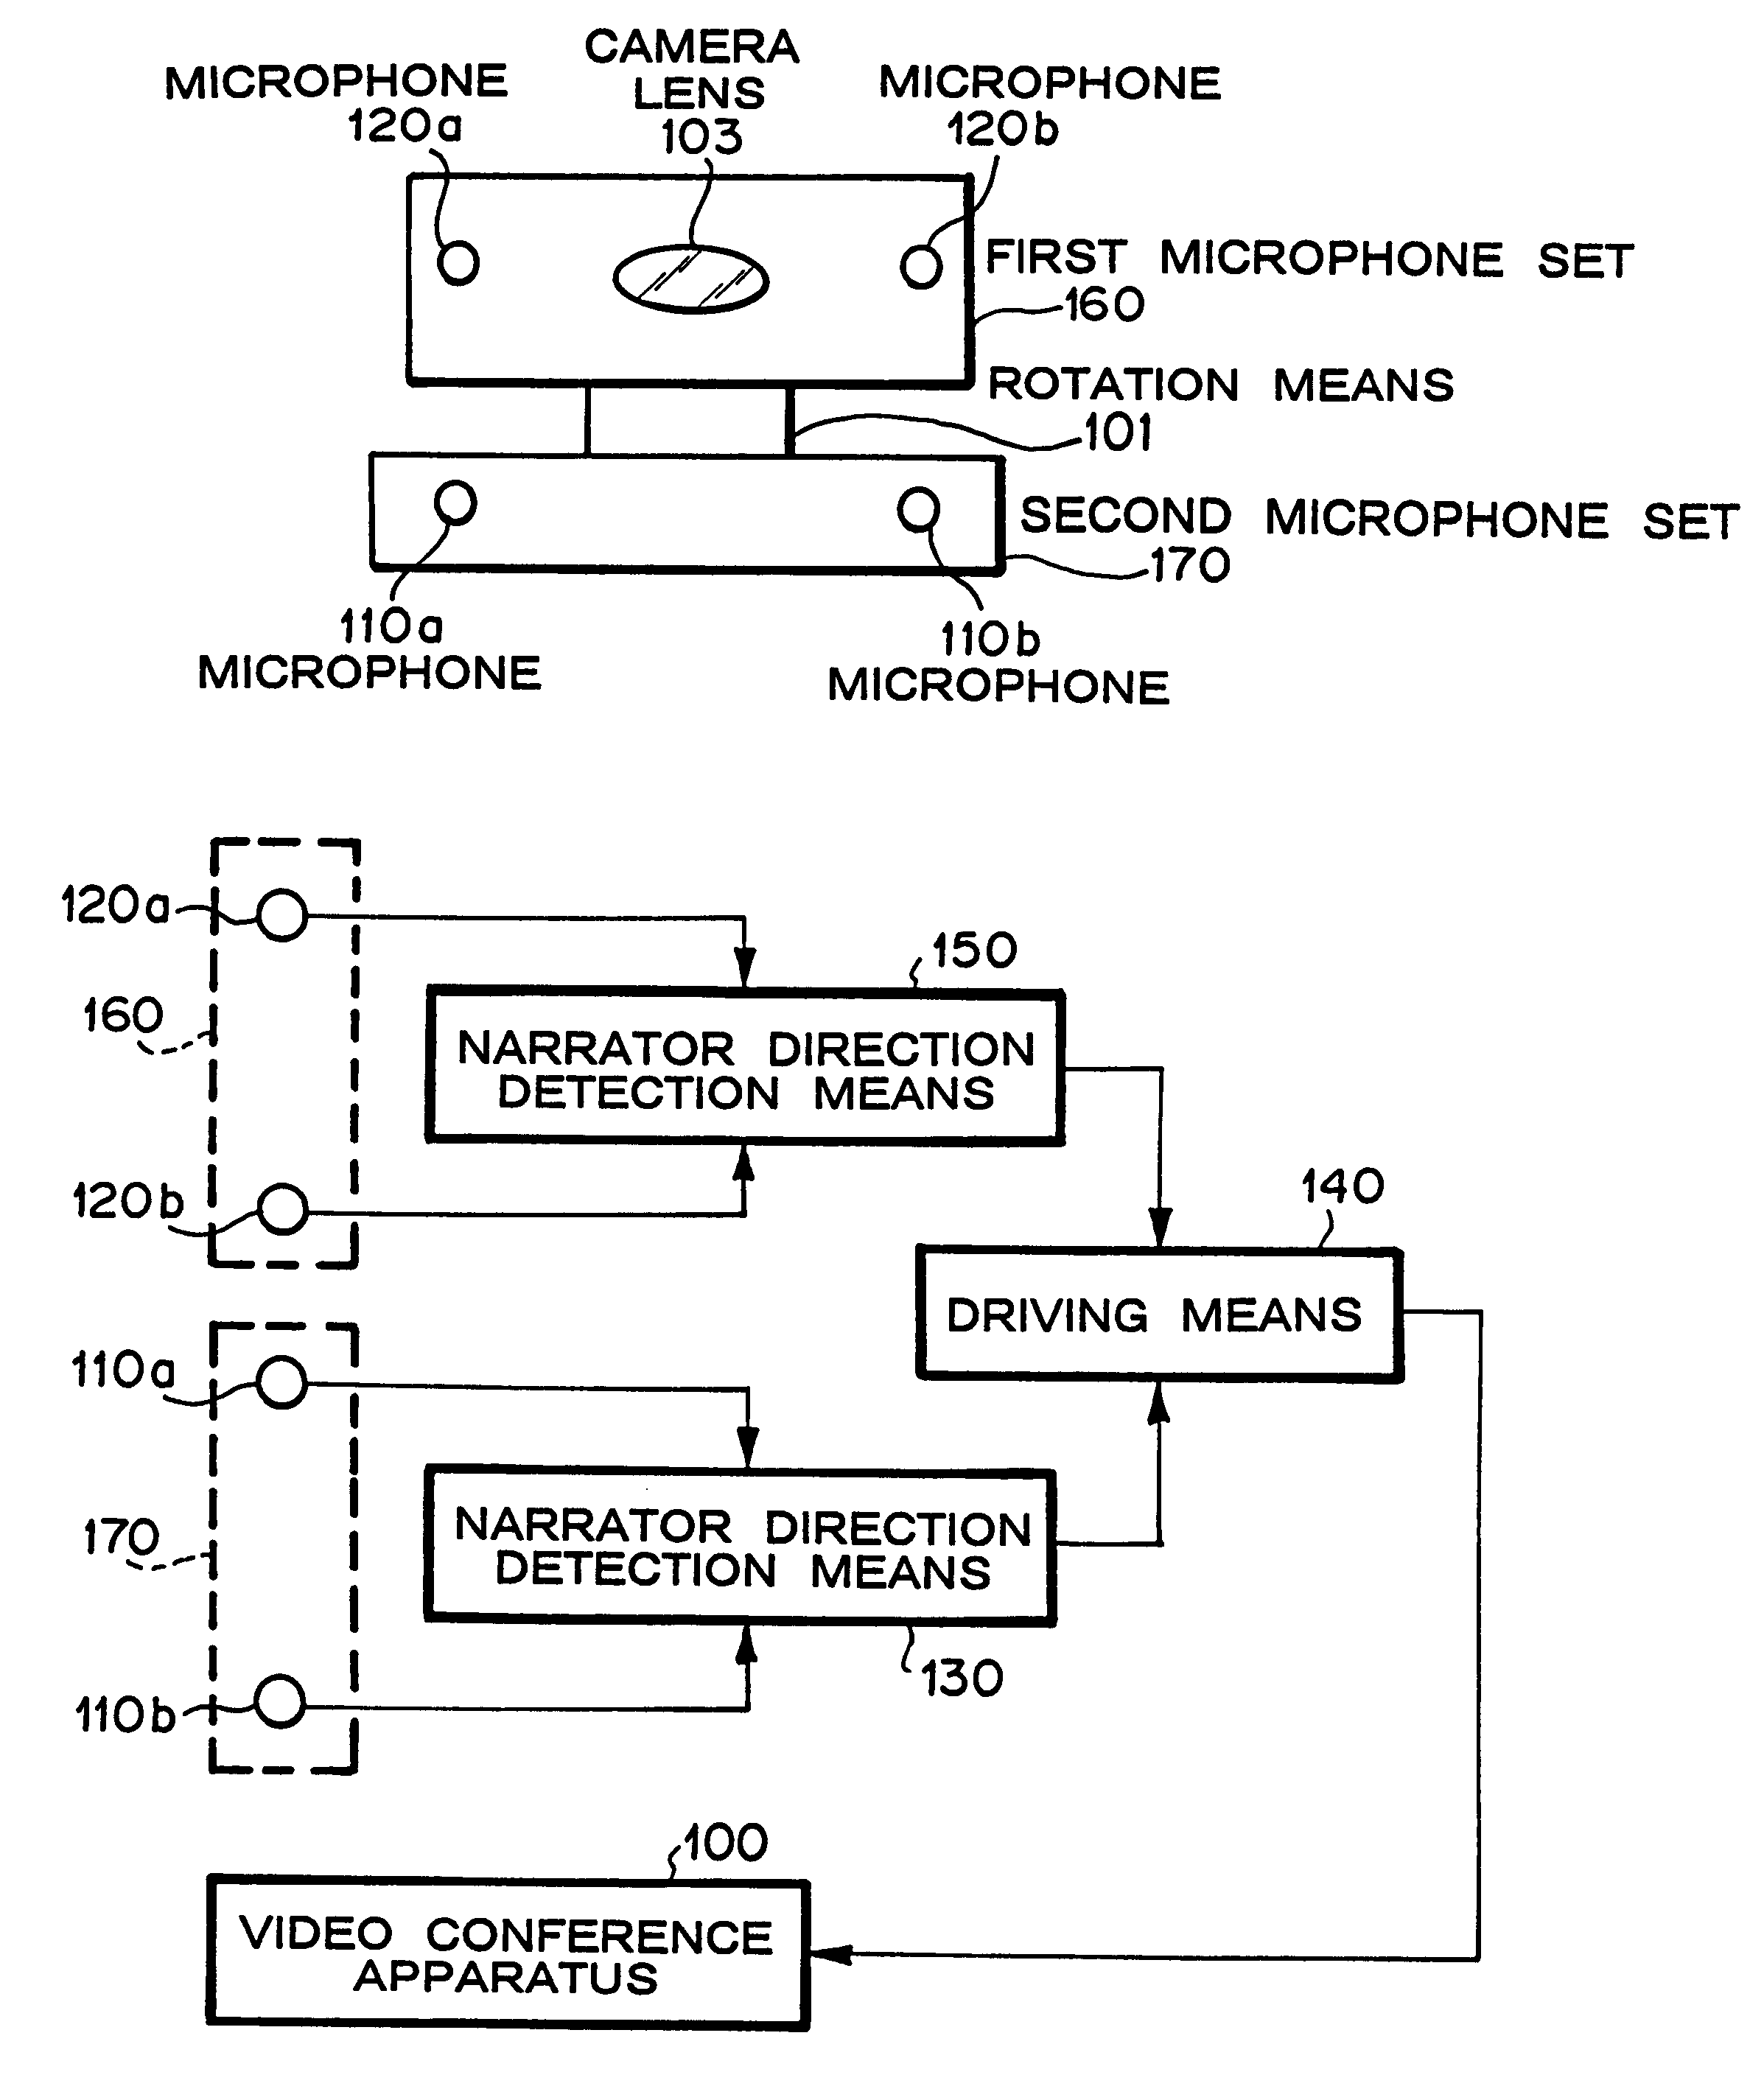 Apparatus for detecting direction of sound source and turning microphone toward sound source